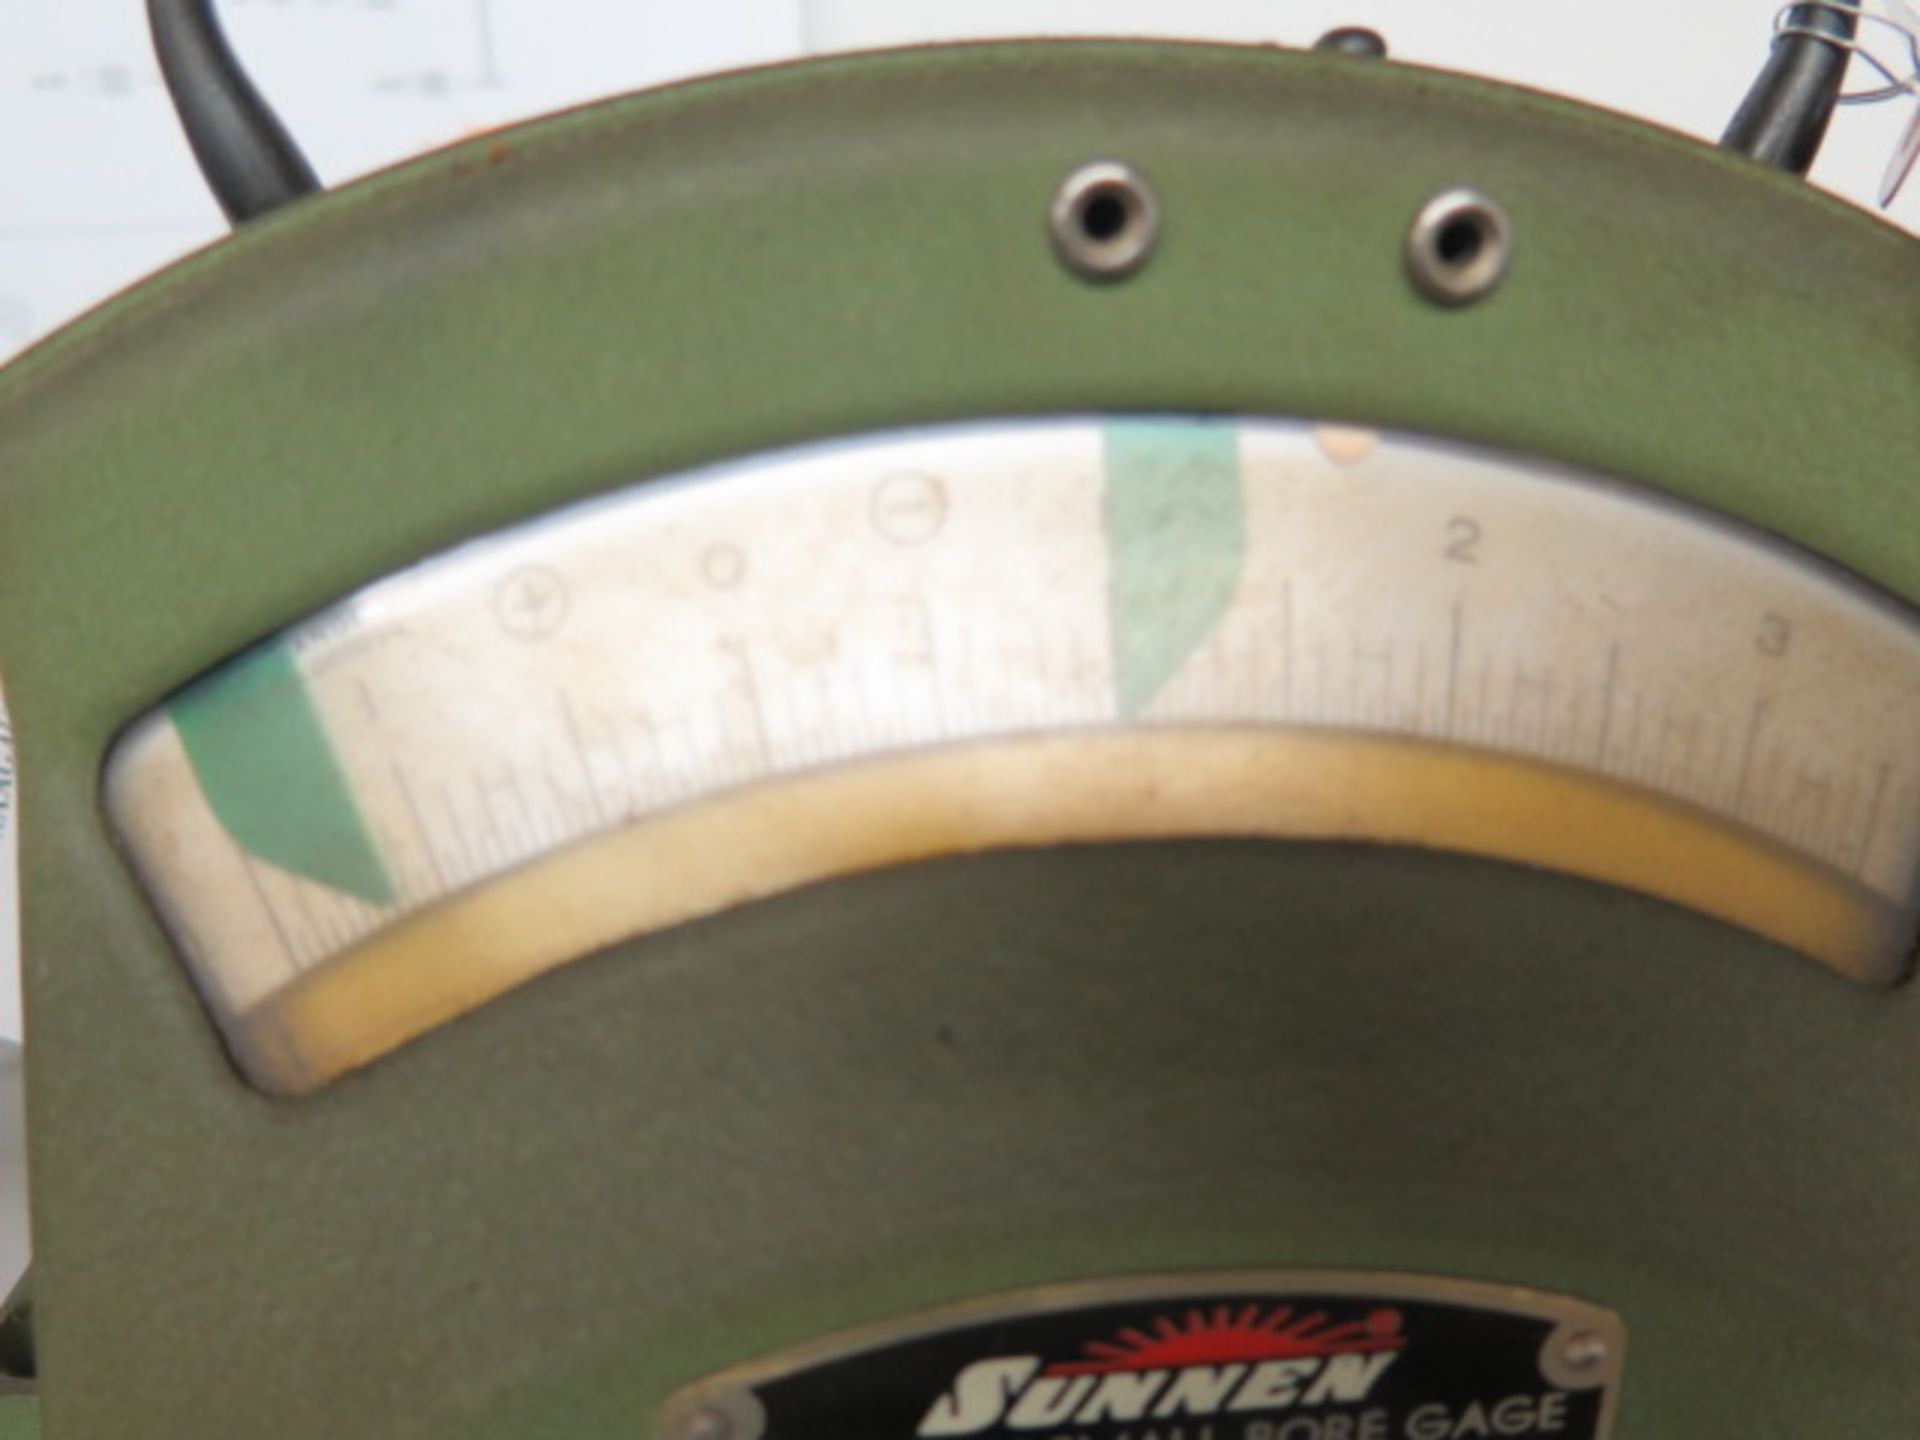 Sunnen PG-700-E Precision Hone Gage (SOLD AS-IS - NO WARRANTY) - Image 5 of 6